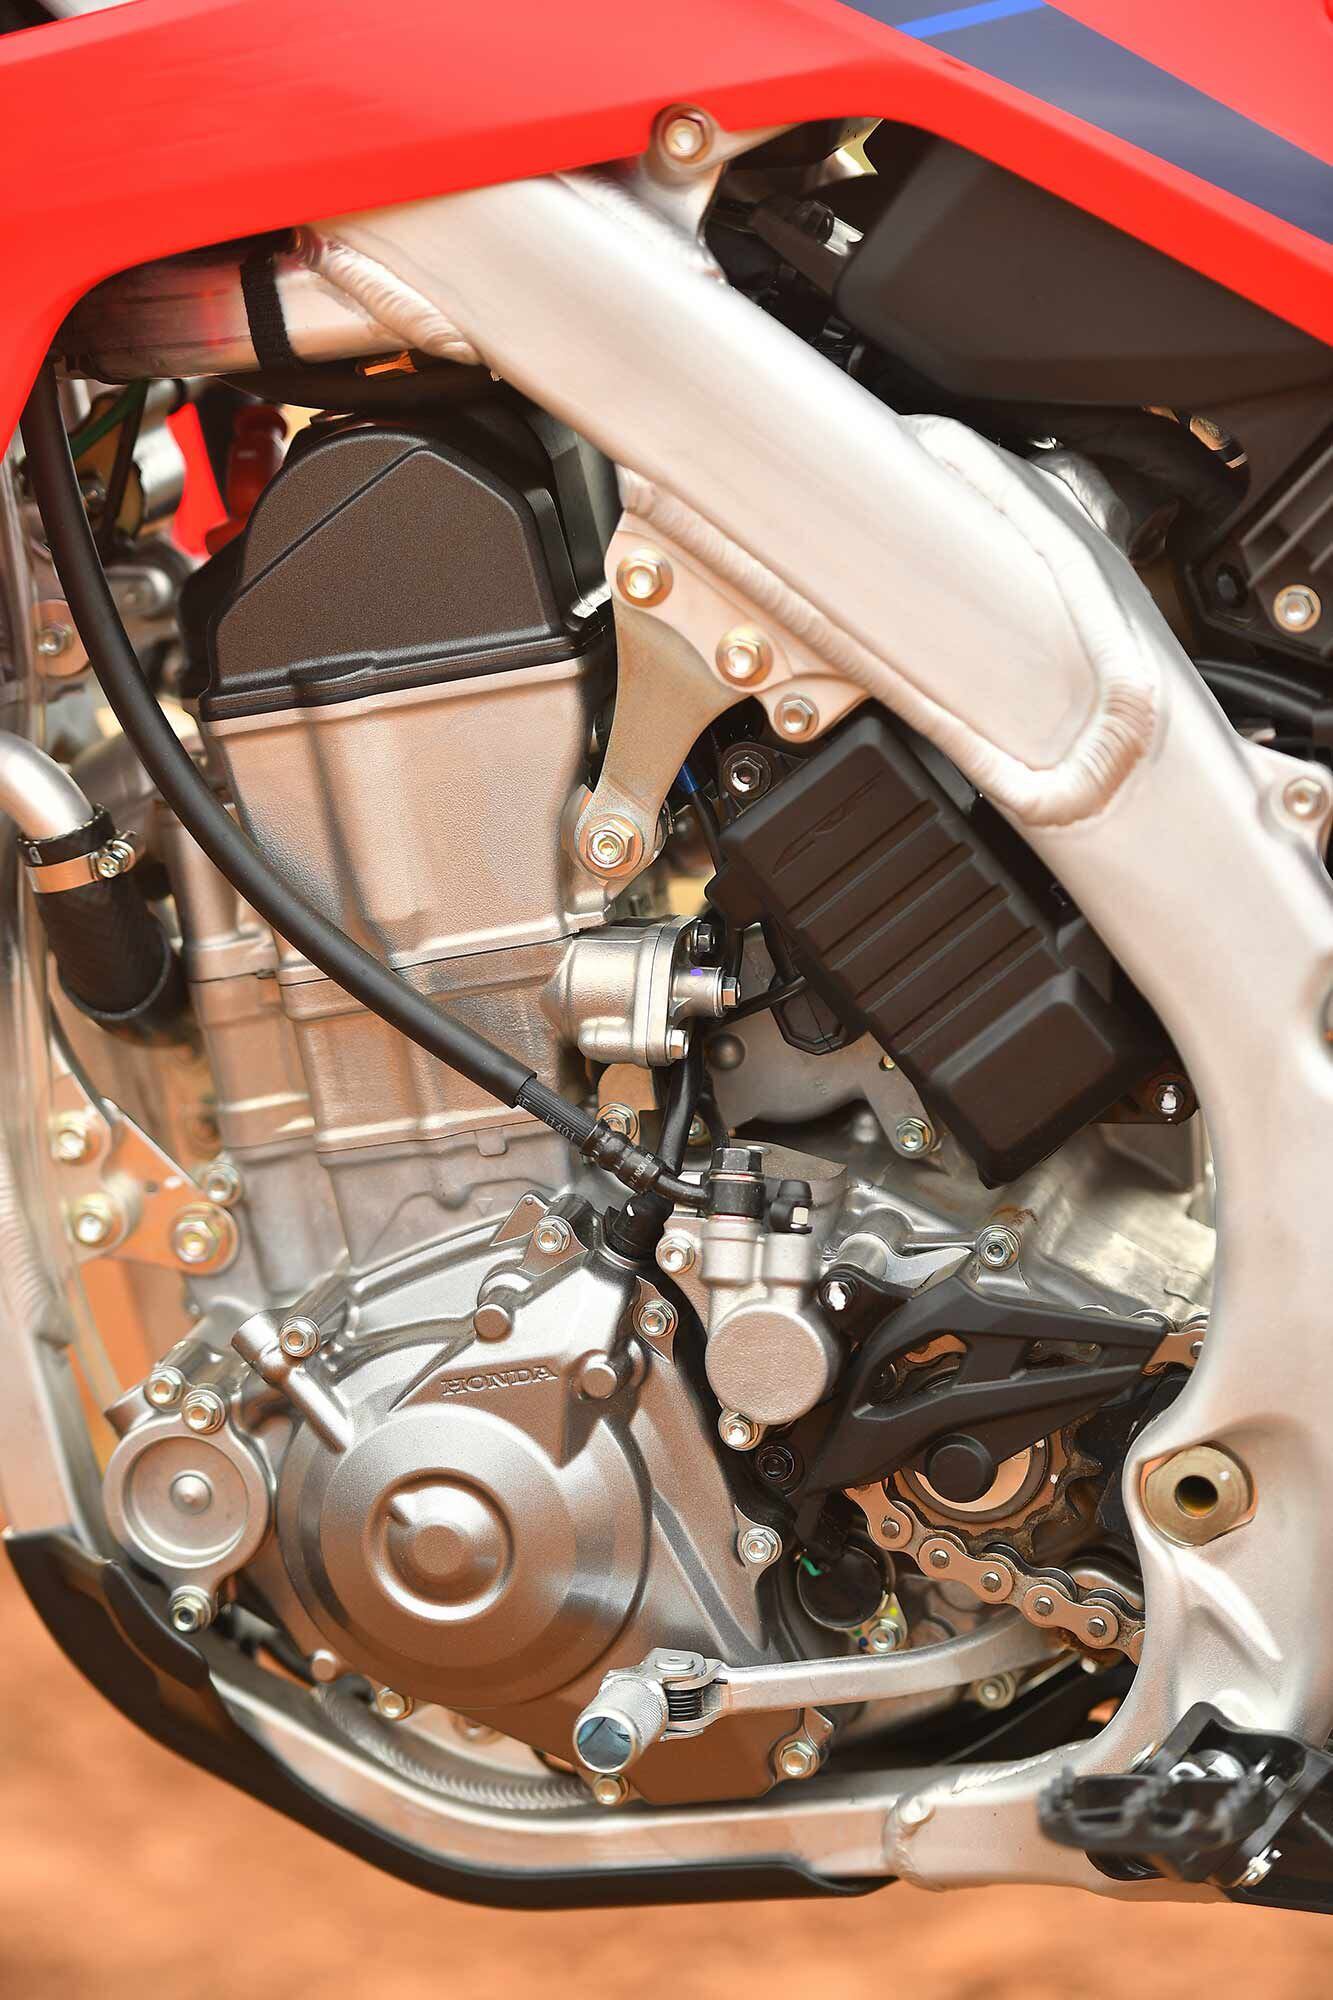 Lurking deeper within the potent Honda, CRF450RX changes include dedicated ECU and suspension settings tailored to off-road conditions. The same hydraulic clutch is utilized on both the CRF450R and CRF450RX, whereas the CRF450X and CRF450RL are both cable actuated.